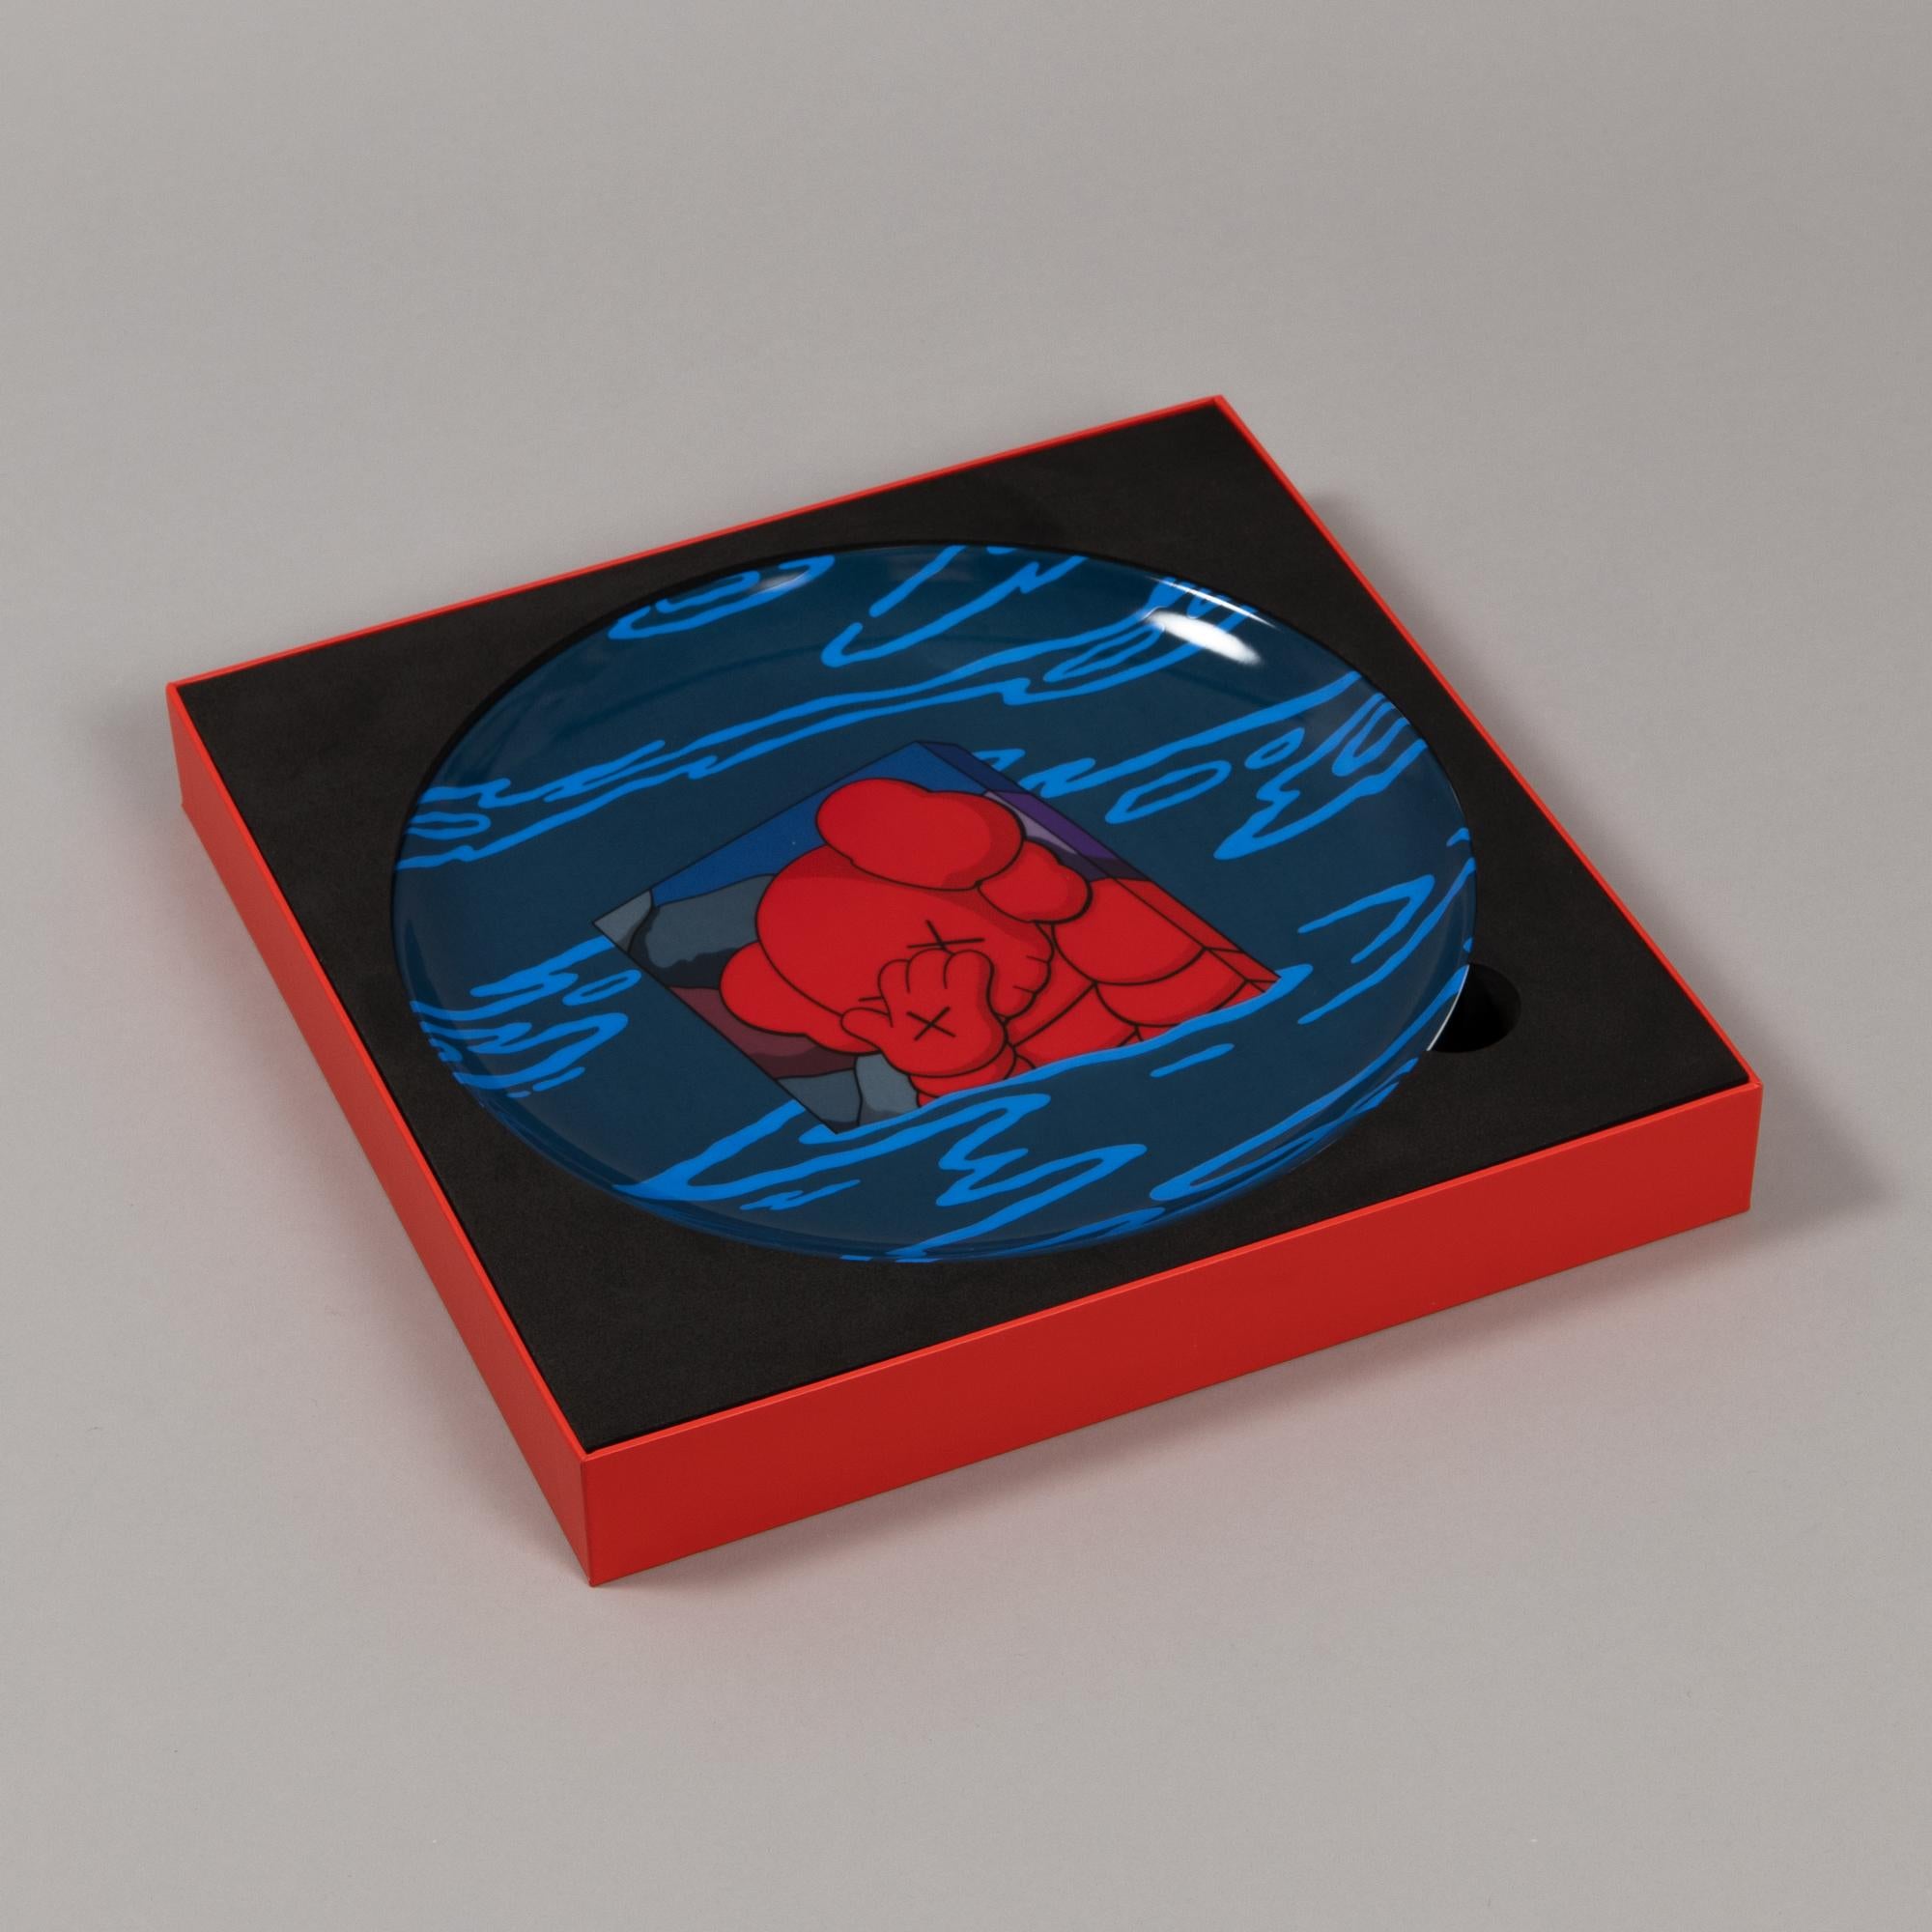 KAWS, Hours, Nights, Weeks, Months - Limited Edition Plate, Street Art For Sale 5